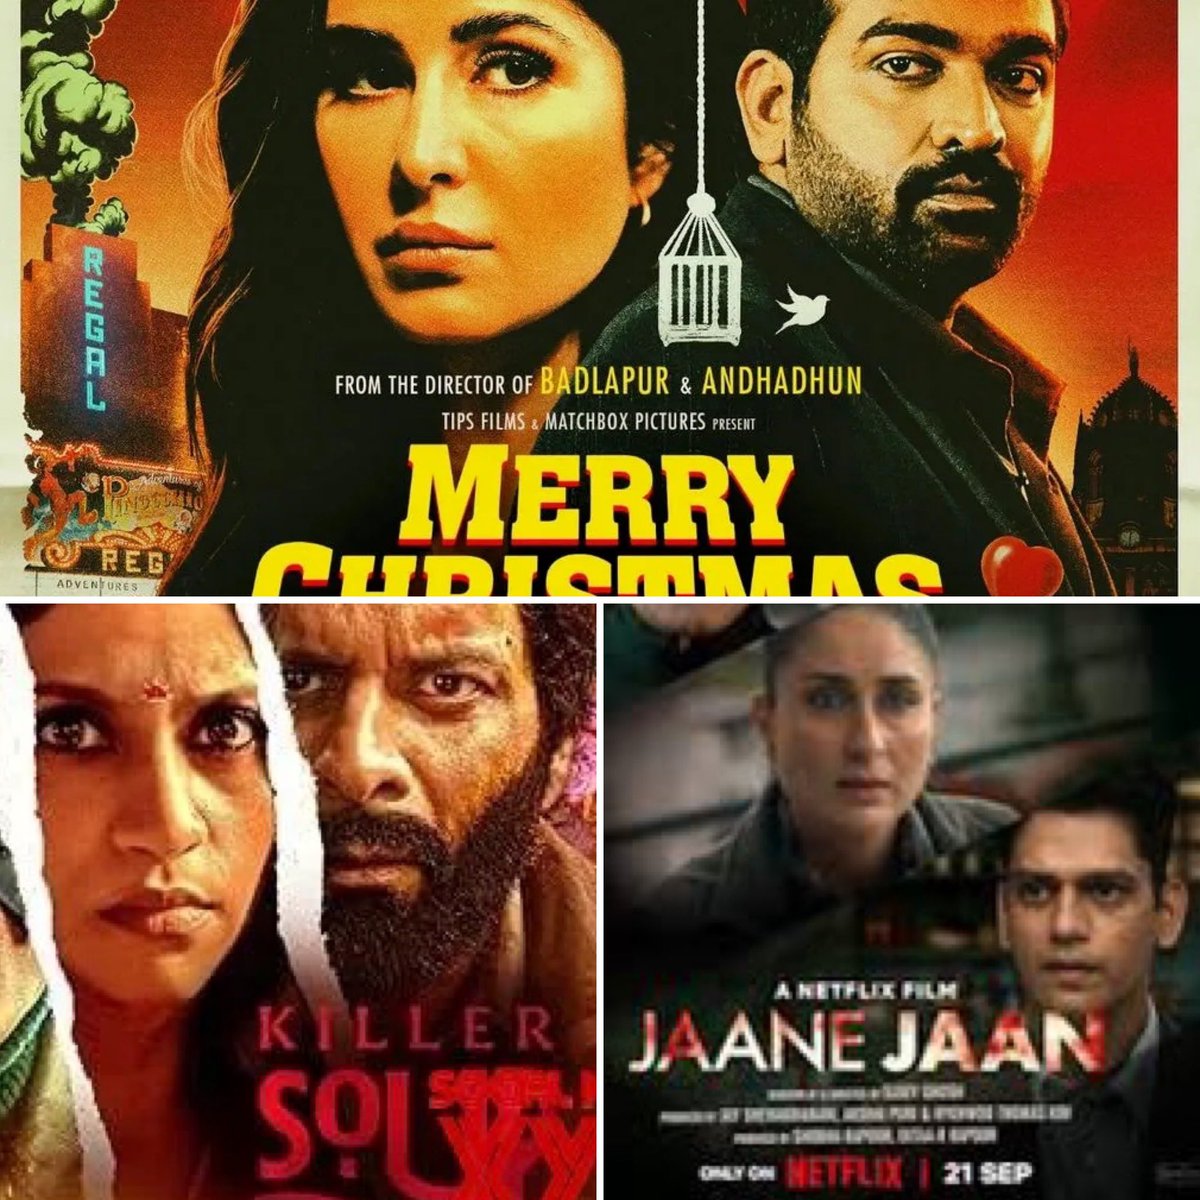 Female actors over 40 are having the best time right now and as a woman on the cusp of 40, this is what I want more of! 

Katrina #MerryChristmas
Kareena #JaaneJaan
Konkona #KillerSoup